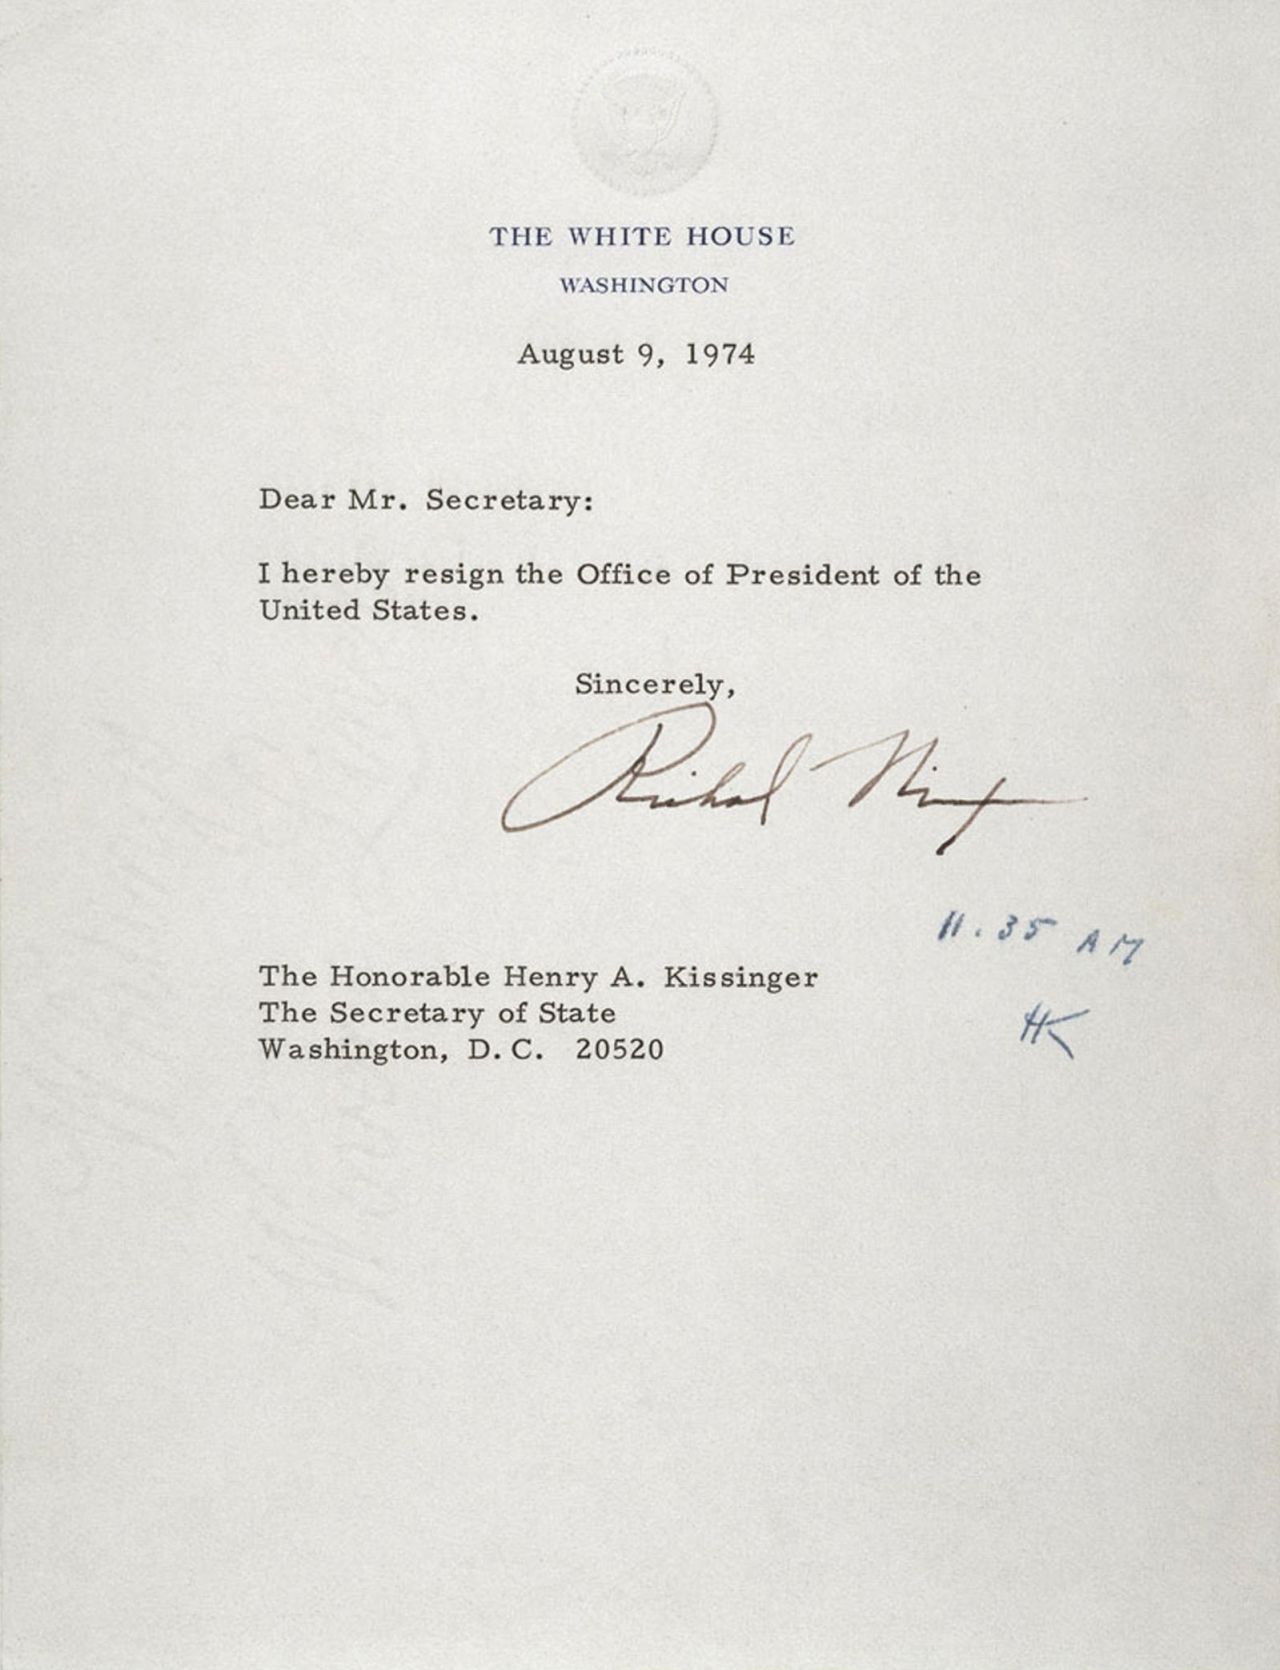 Nixon's resignation letter was initialed by Secretary of State Henry Kissinger at 11:35 a.m. on August 9, 1974.